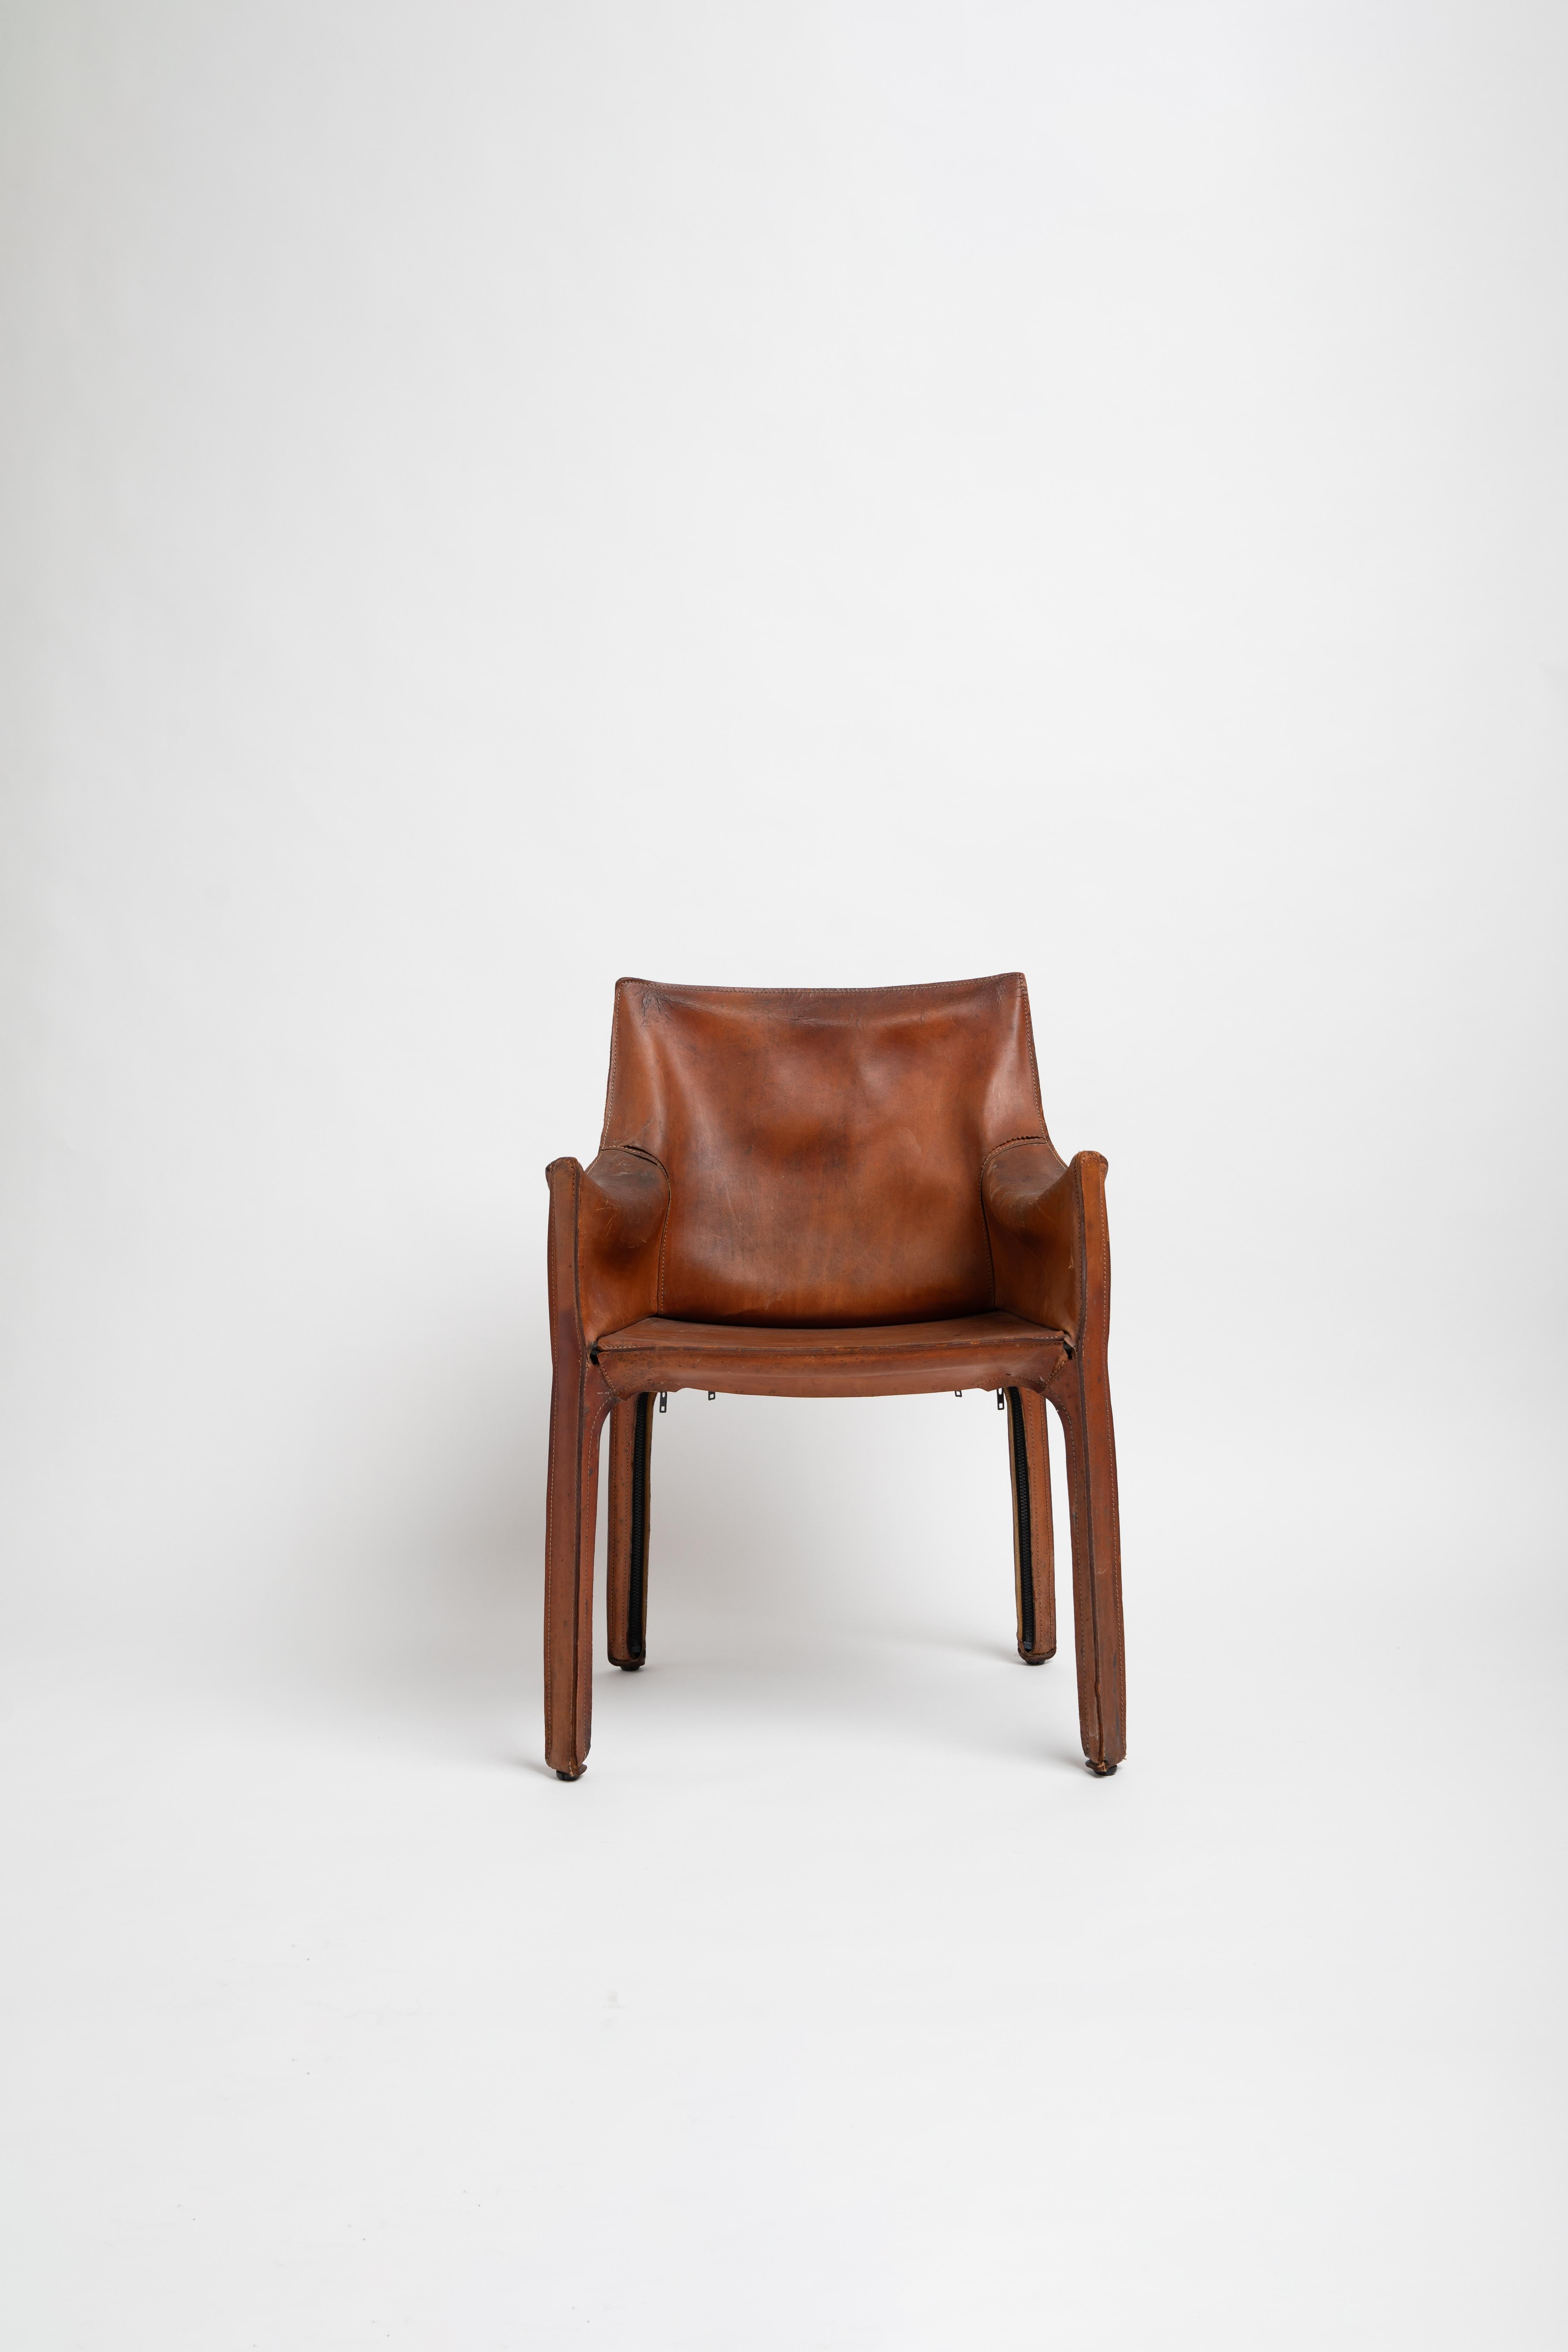 Cab is the world's first free-standing cowhide chair, informed by the relationship between the human skeleton and the skin. Comfortable and welcoming, it embodies Cassina's superior artisan skills and attention to detail. Mario Bellini is an